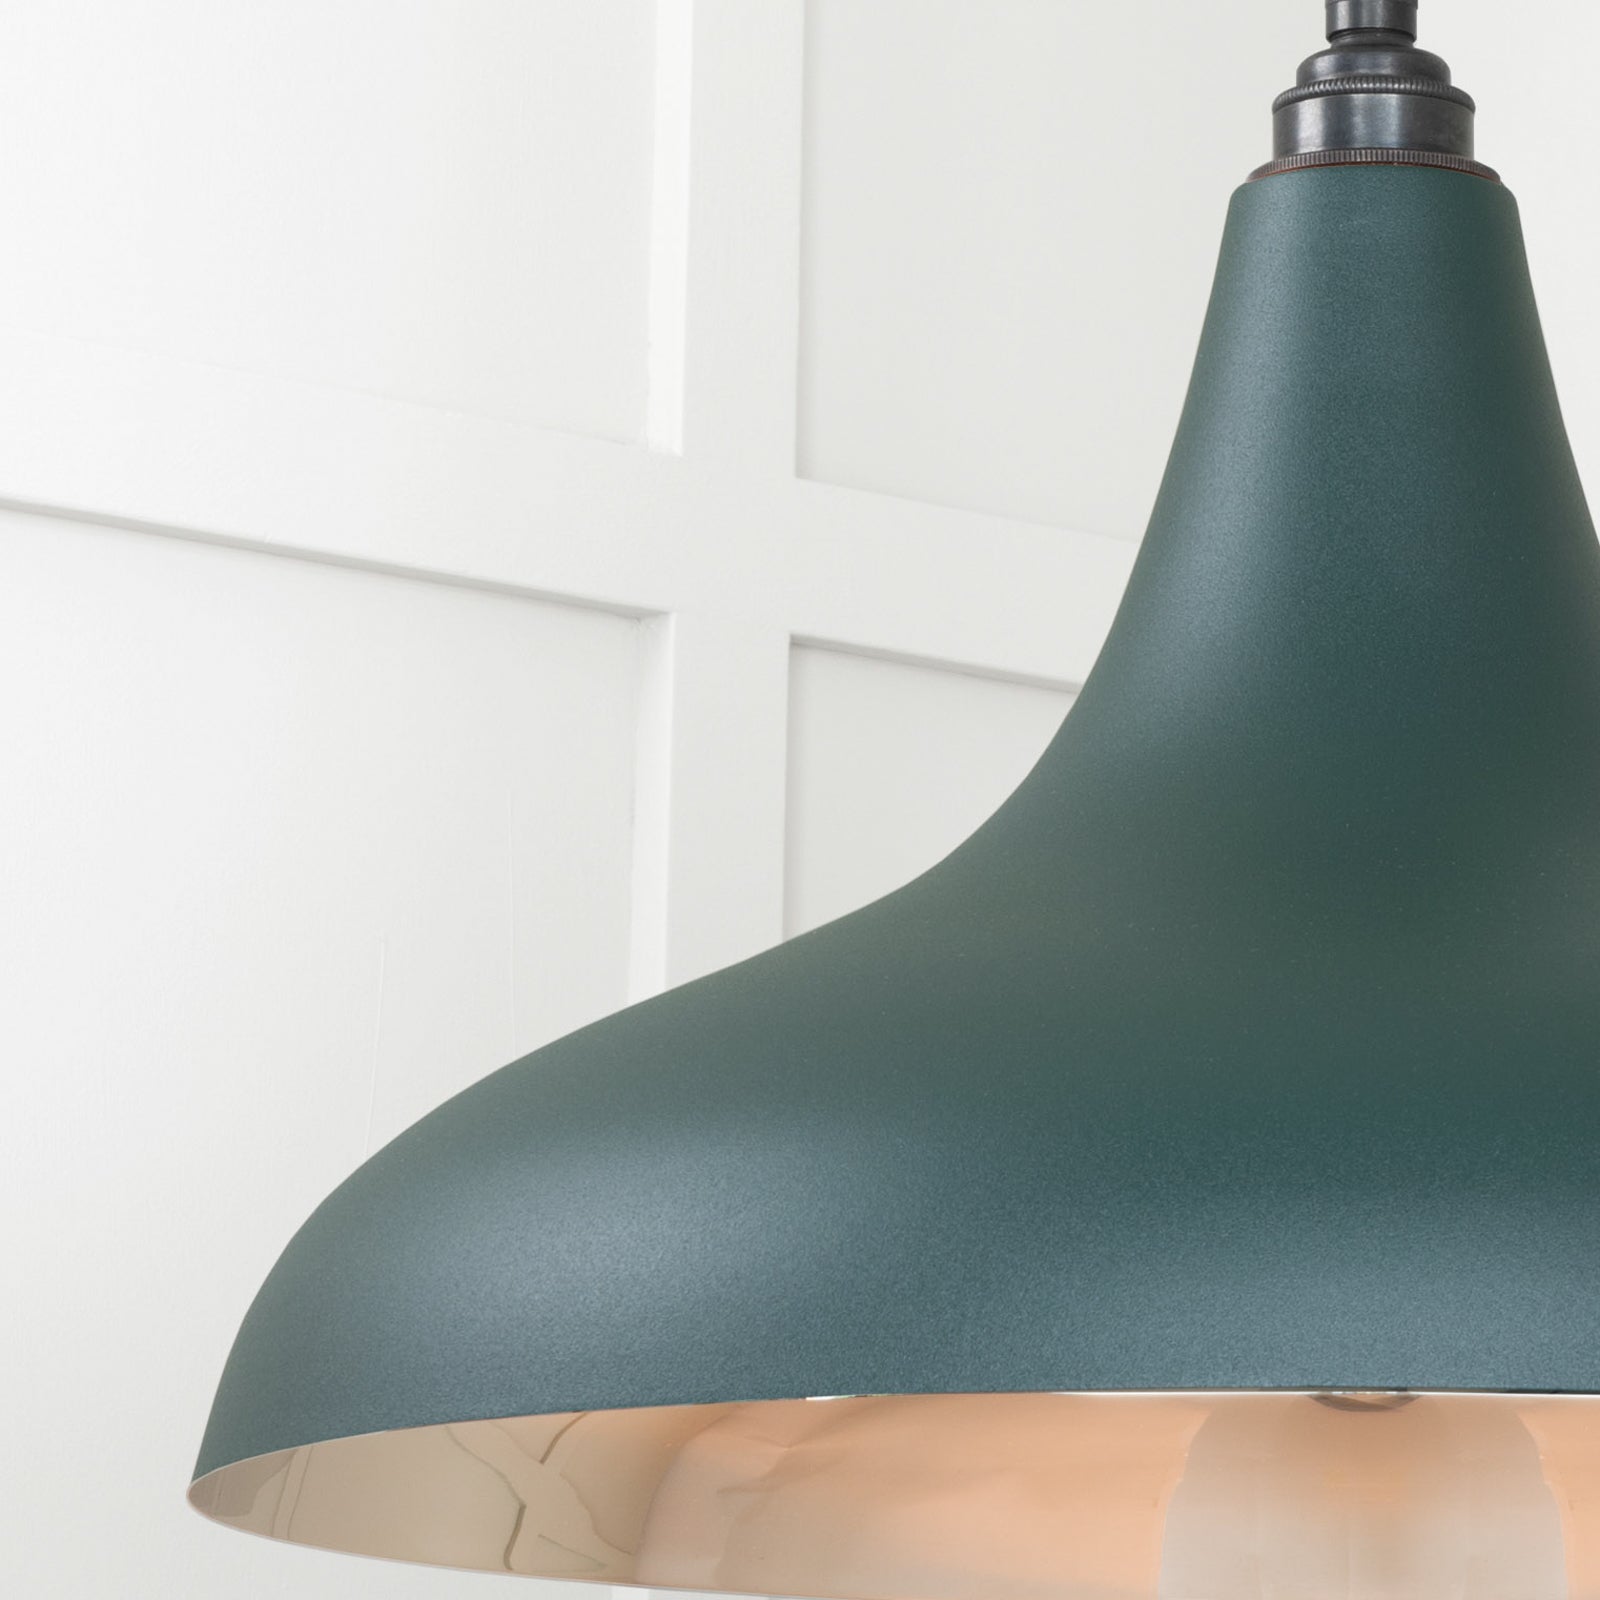 SHOW Close Up Image of Frankley Ceiling Light In Dingle in smooth Copper